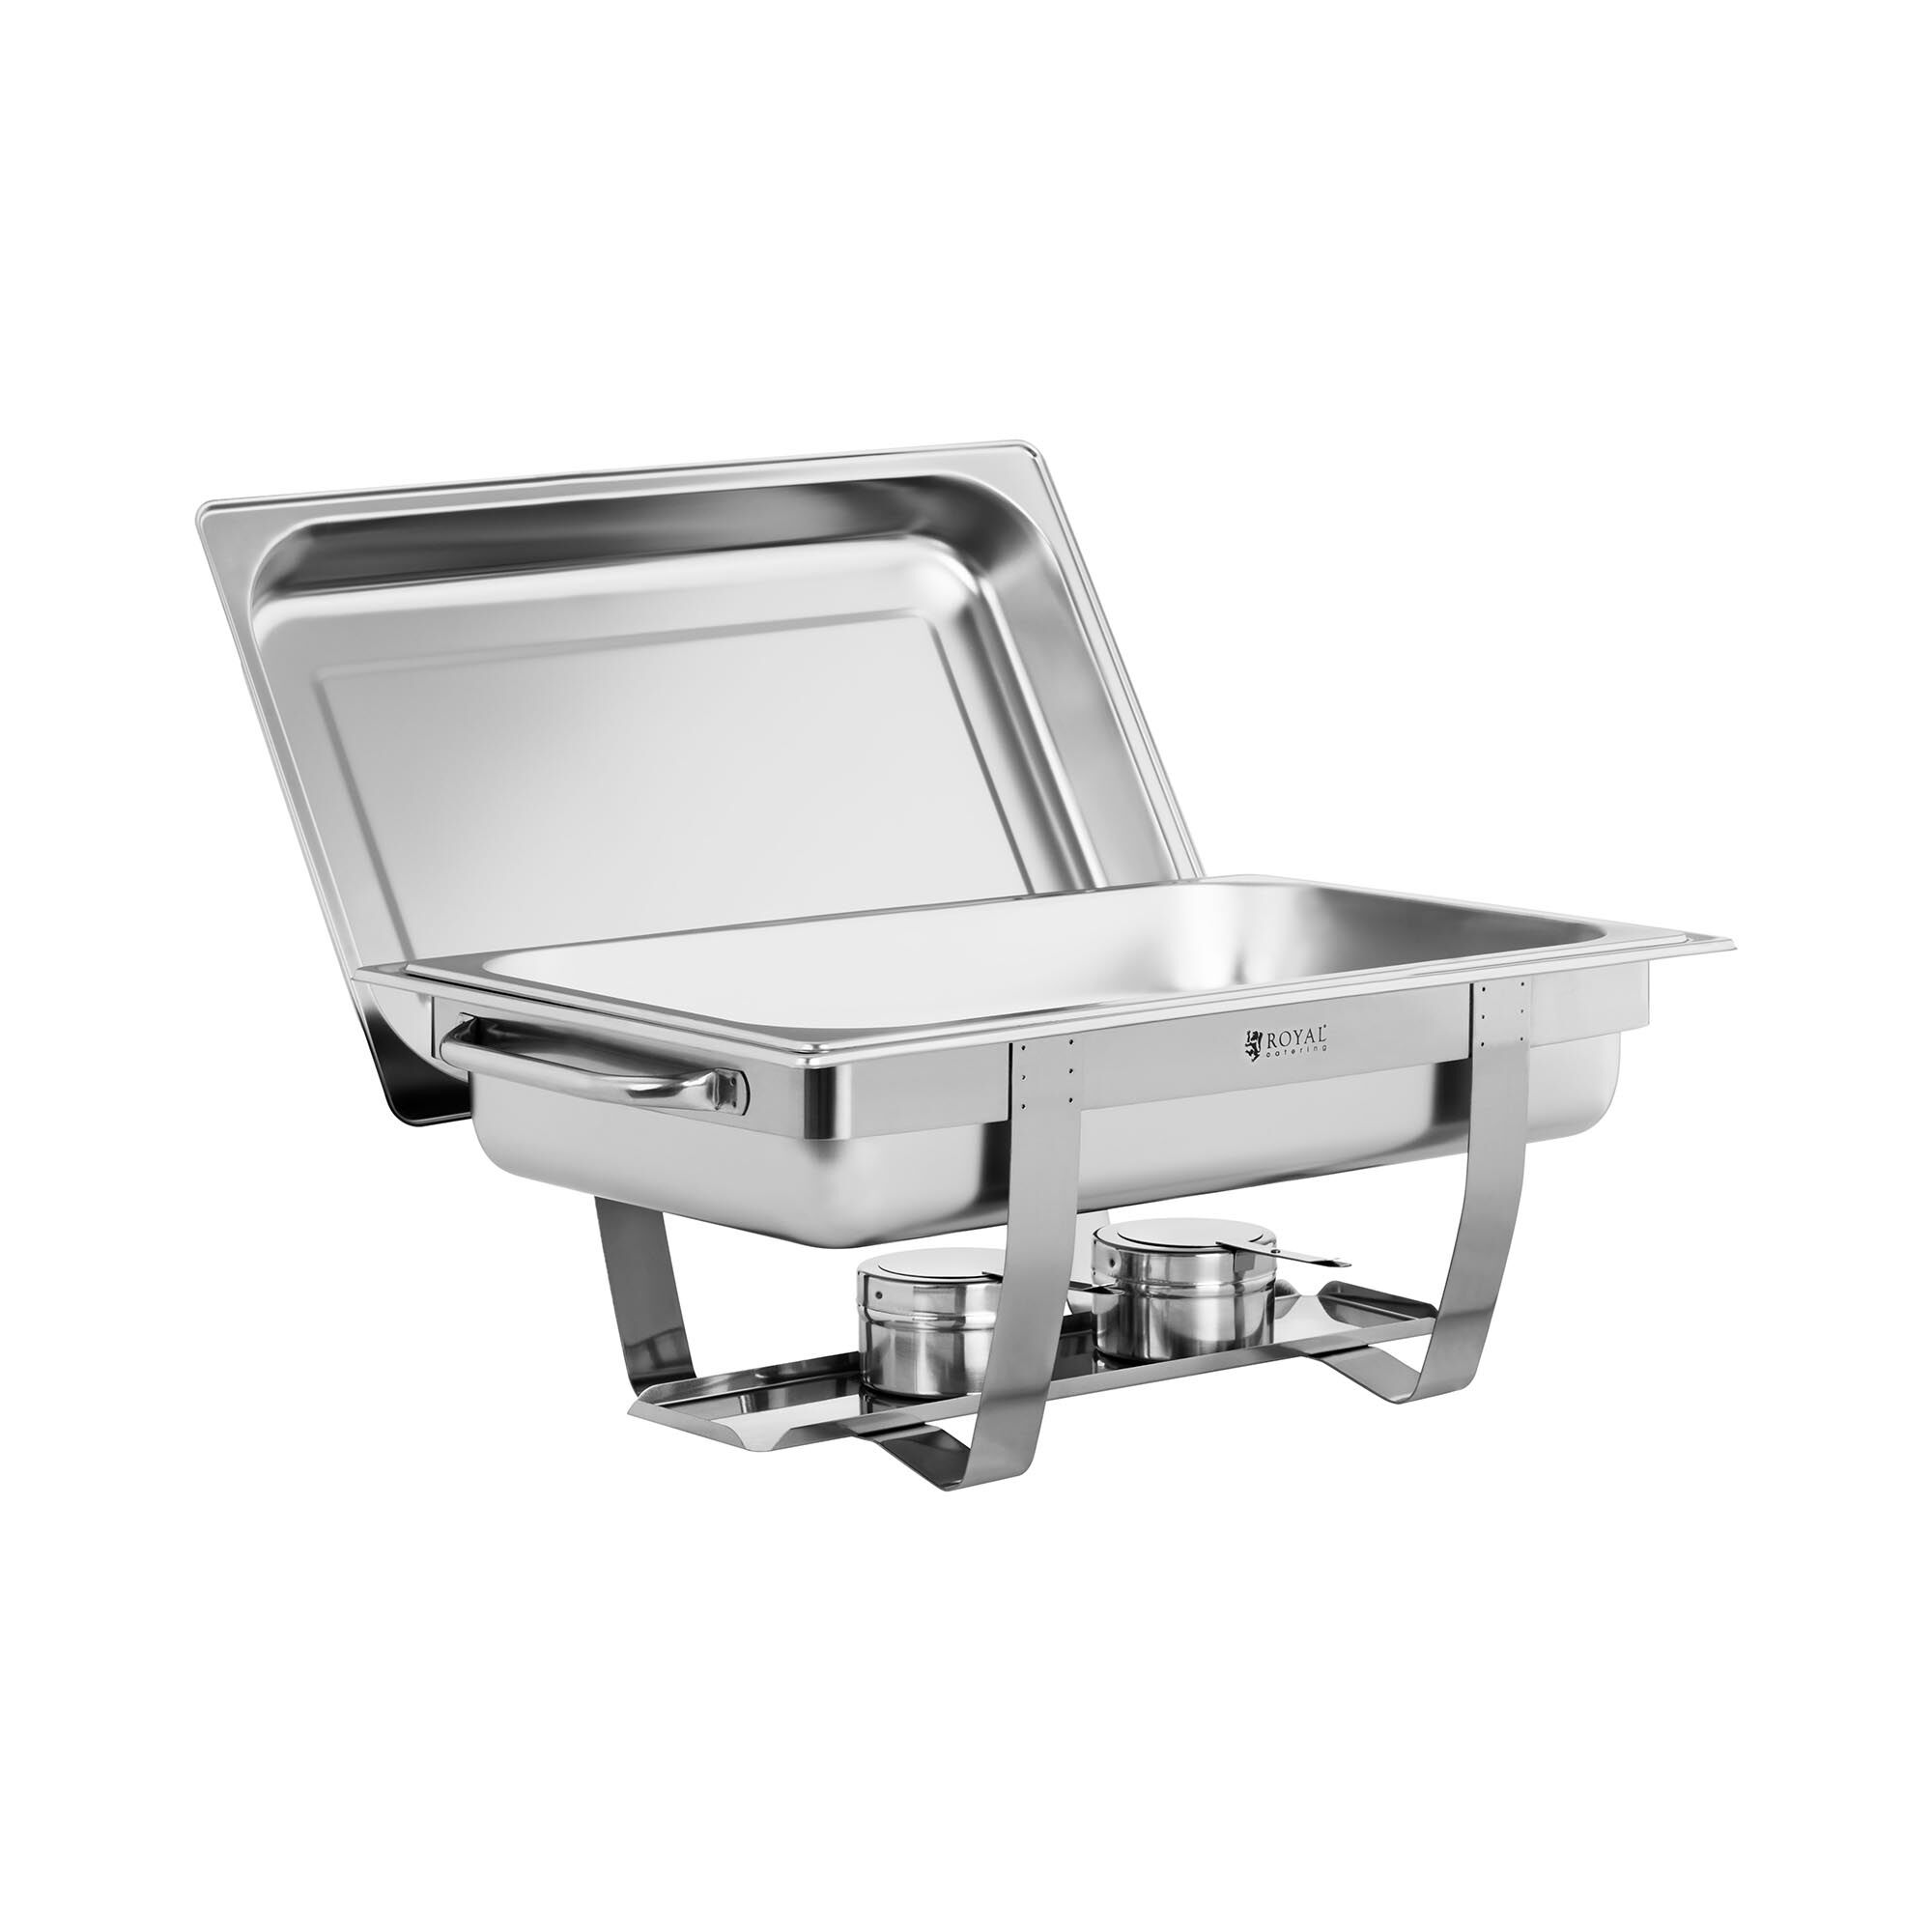 Royal Catering Chafing Dish - GN 1/1 - 8 L - 2 fuel containers